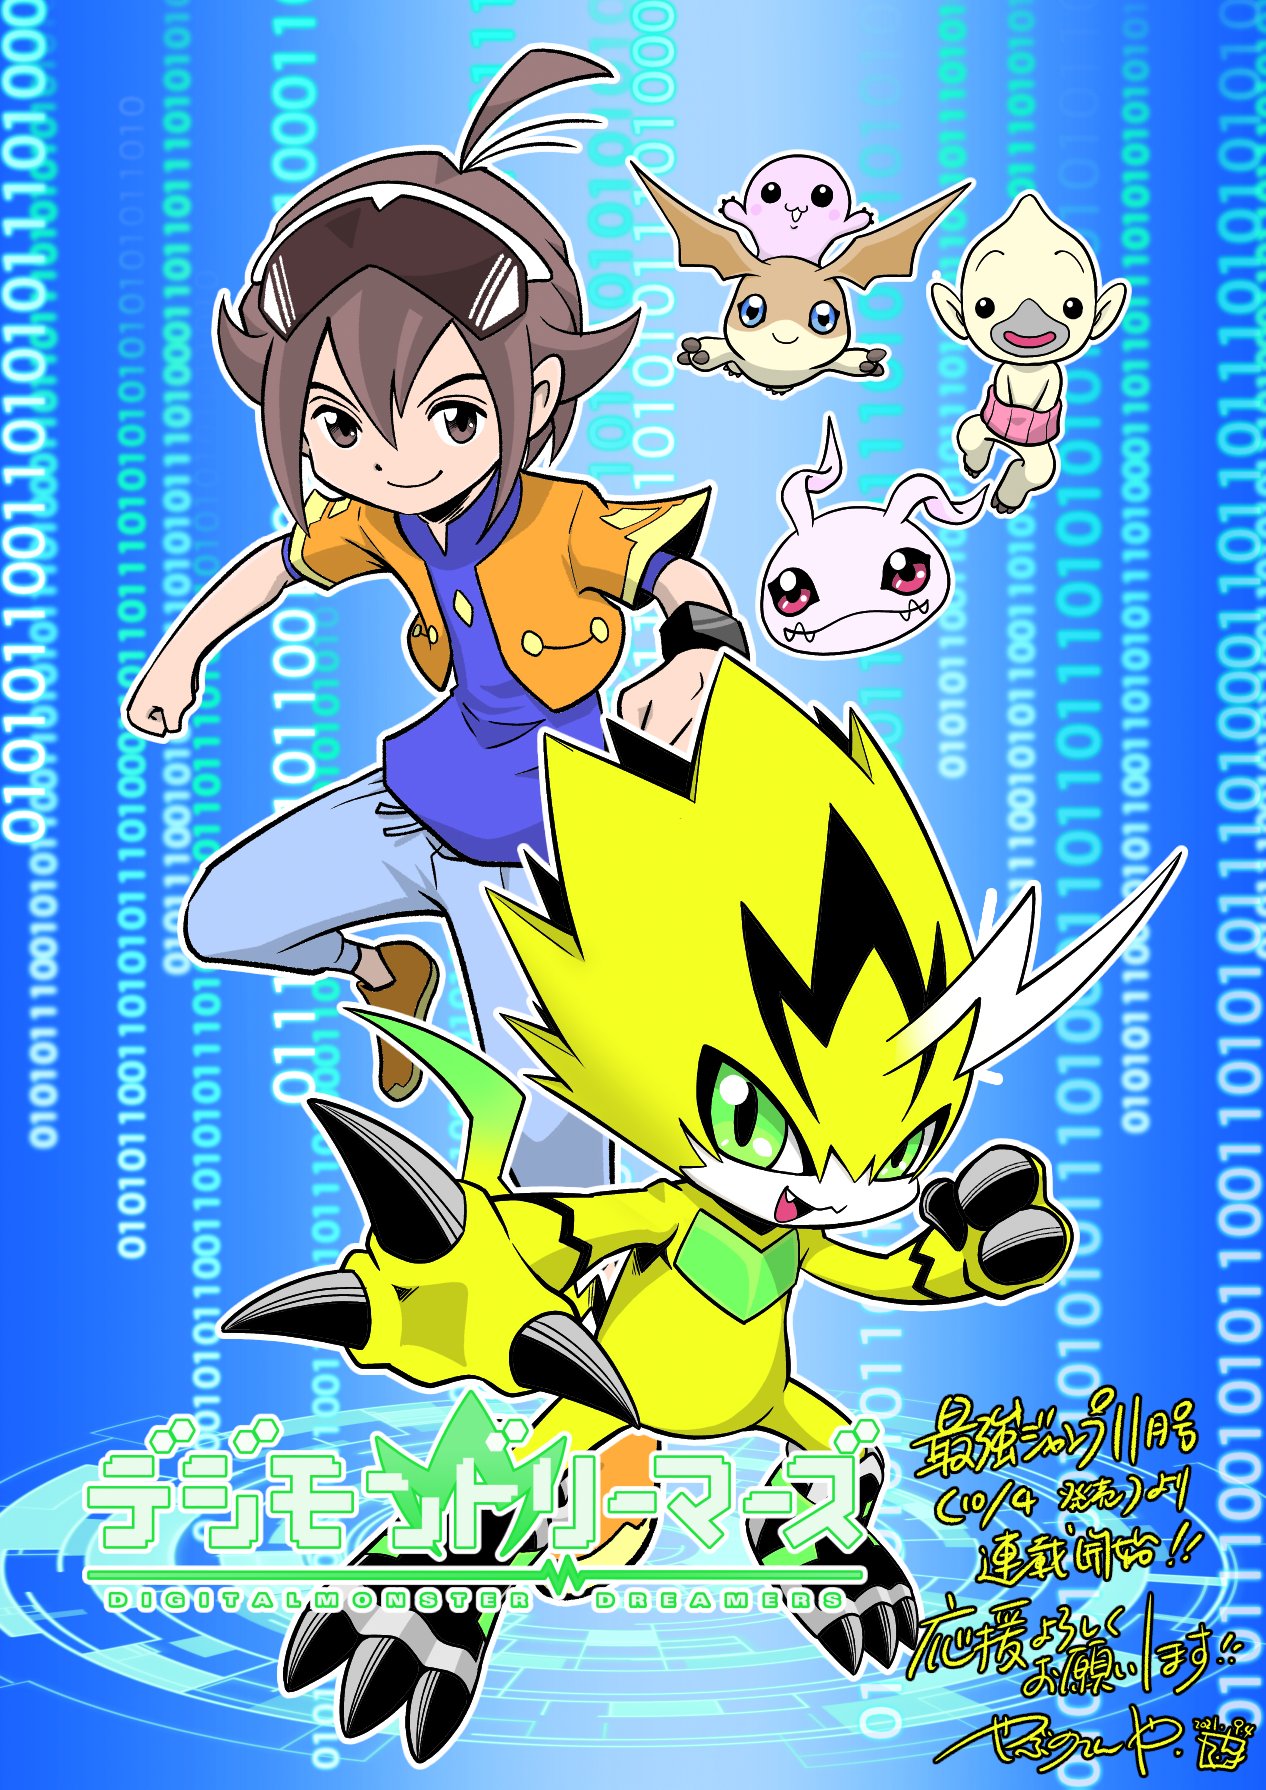 Digimon Ghost Game Episode 50 Profile Art, Dreamers Reference Book